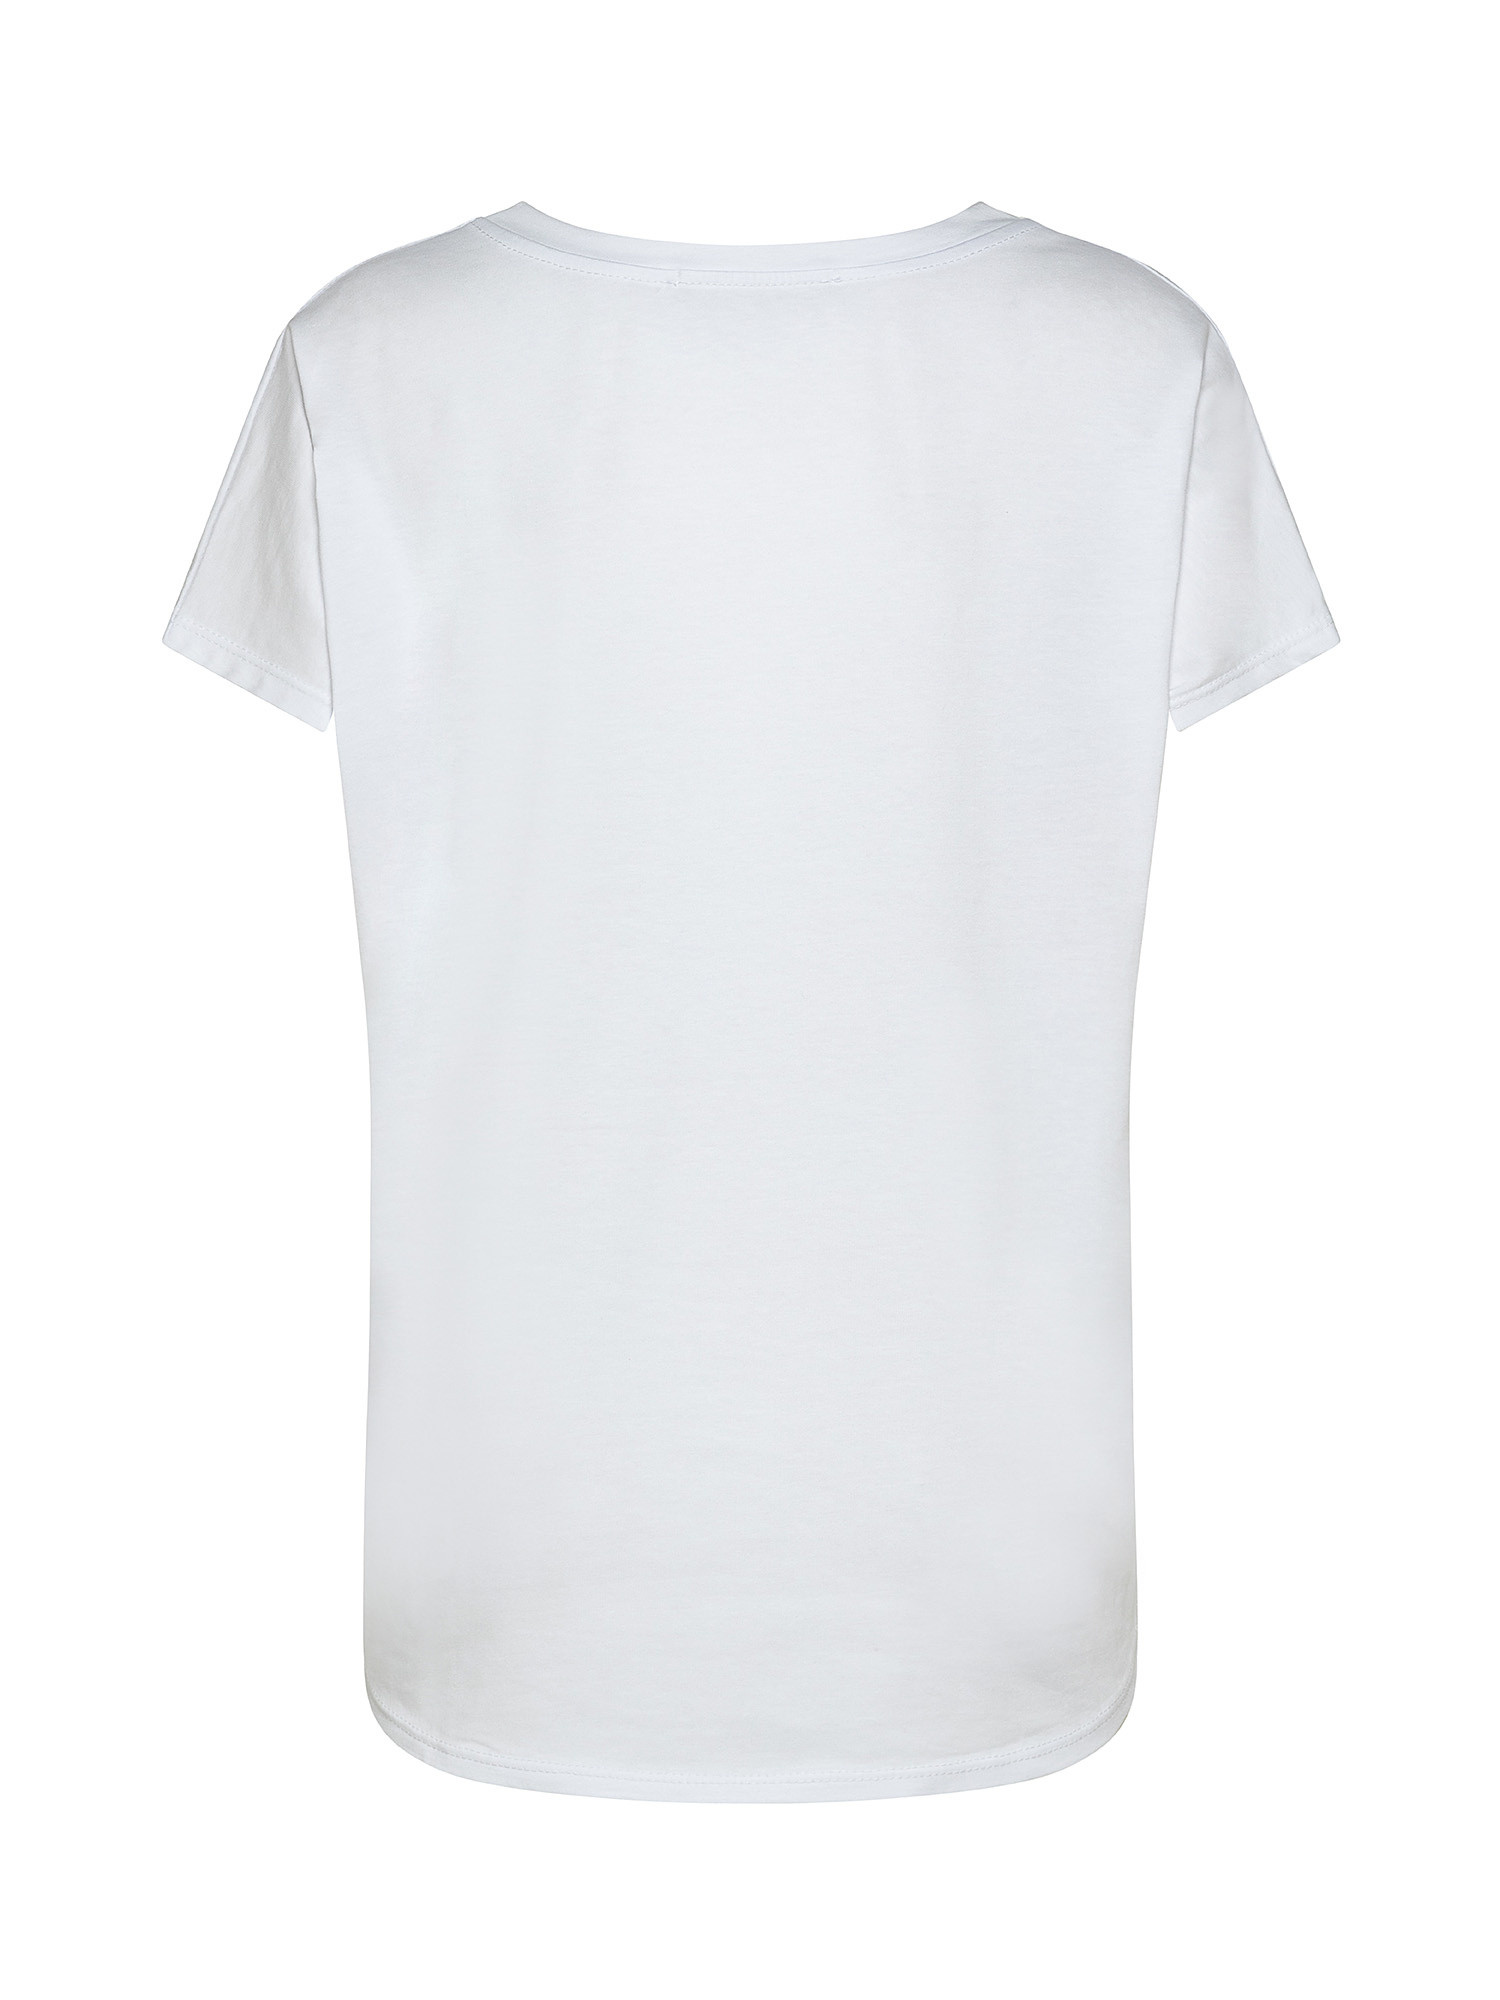 T-shirt with ethnic print, White, large image number 1